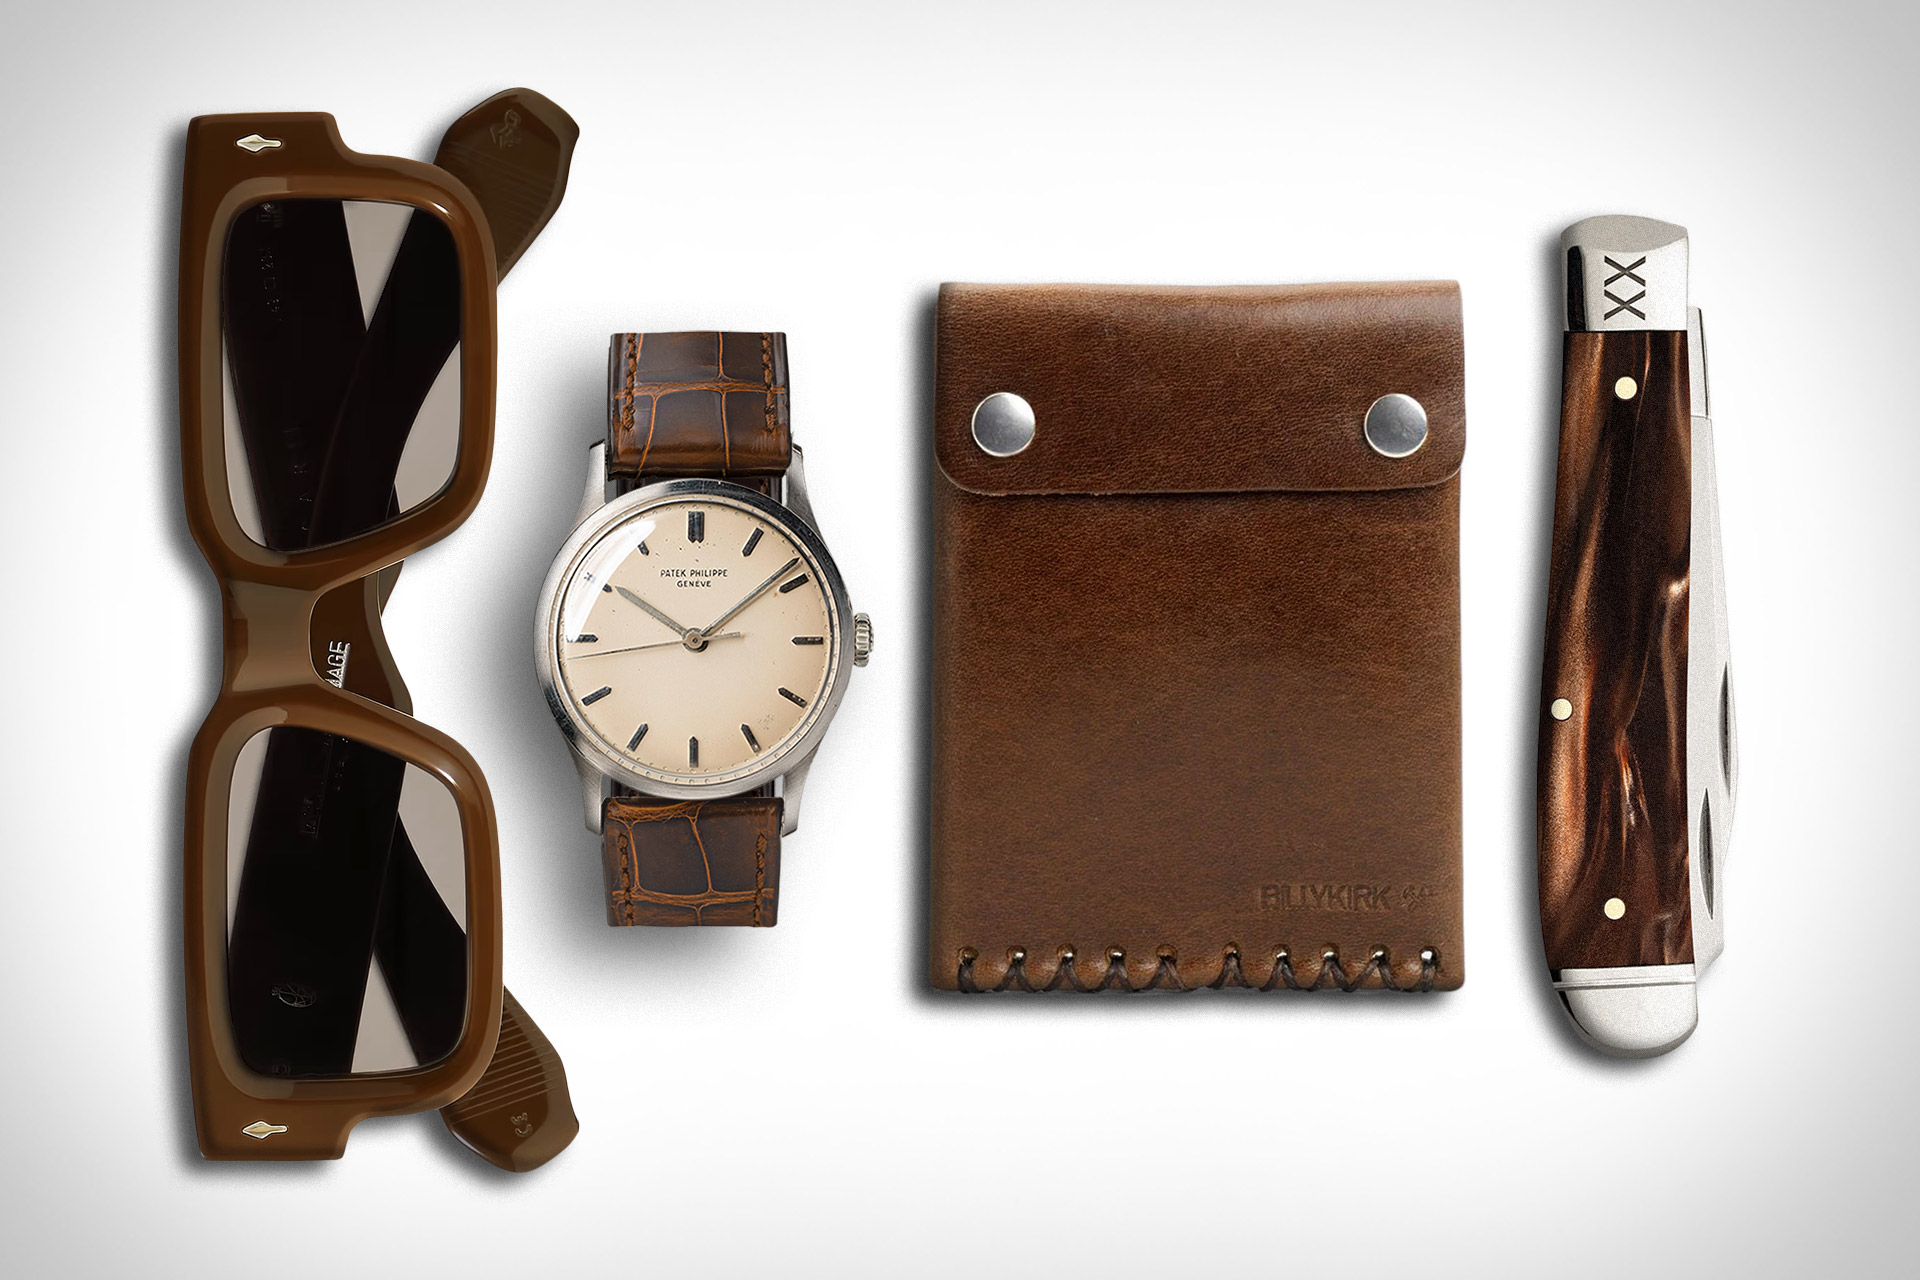 Everyday Carry: Mocha | Uncrate, #Everyday #Carry #Mocha #Uncrate